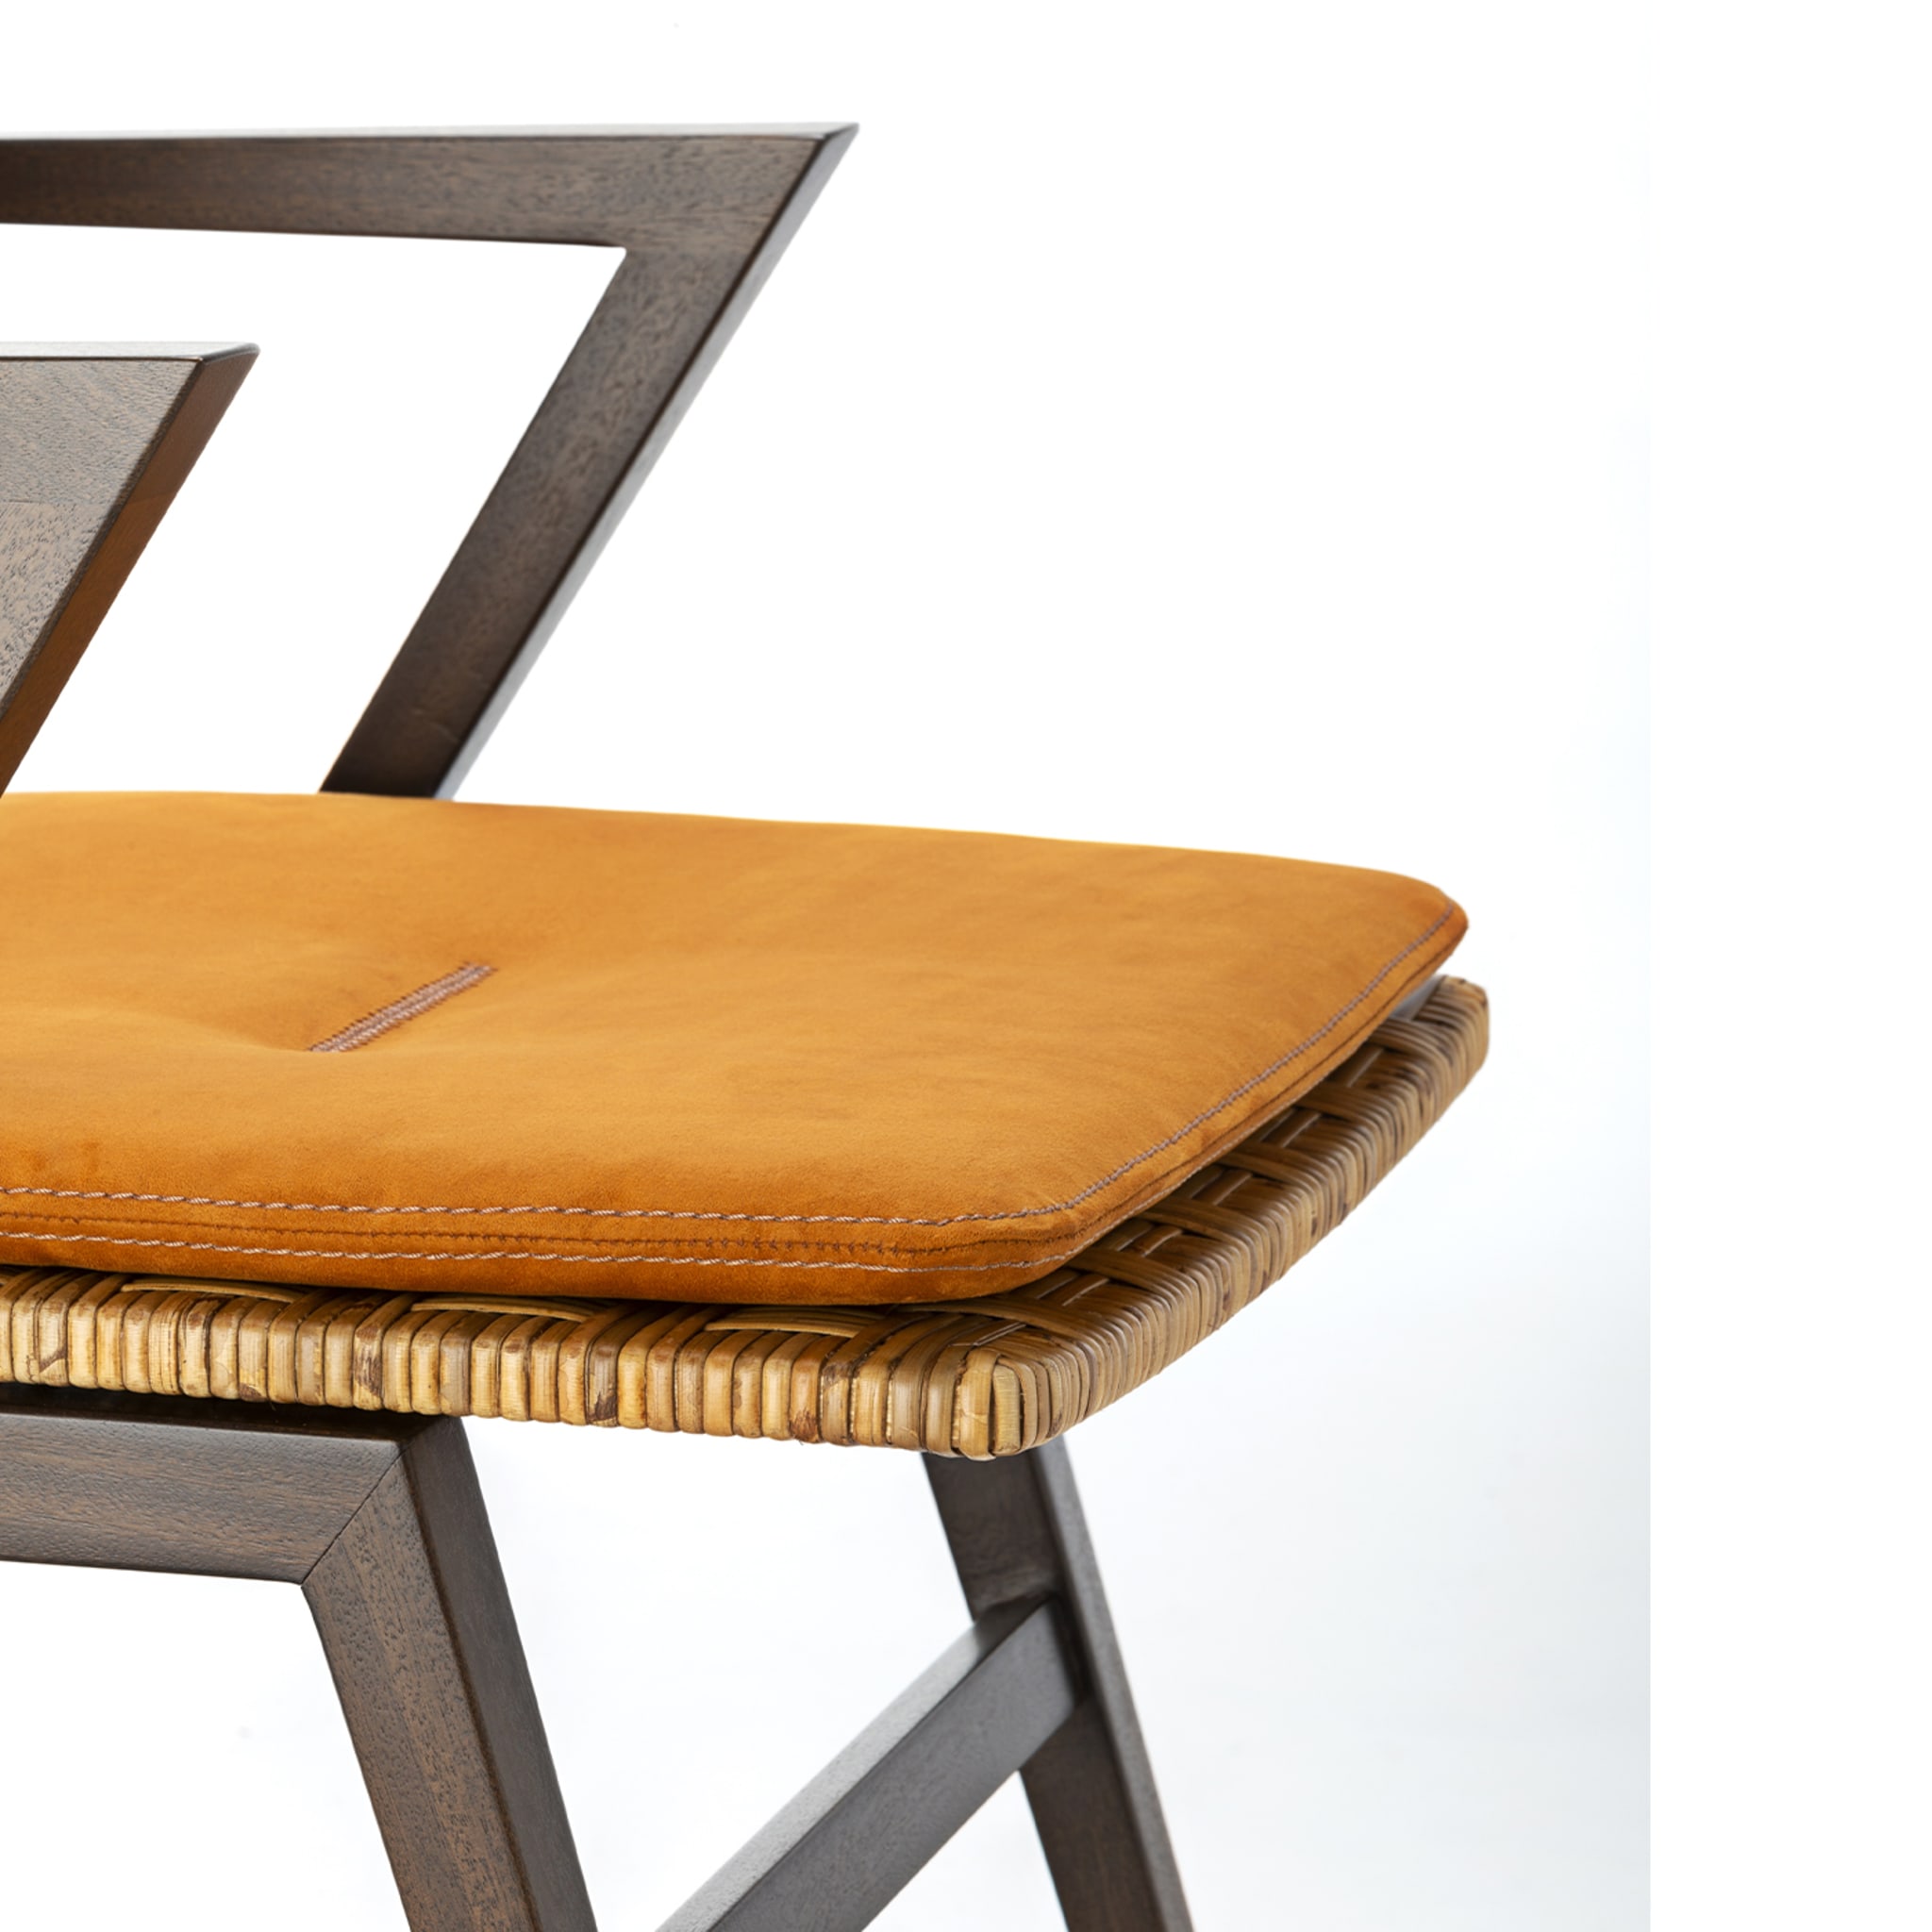 Lupo 1945 Chair by Franco Albini - Alternative view 3